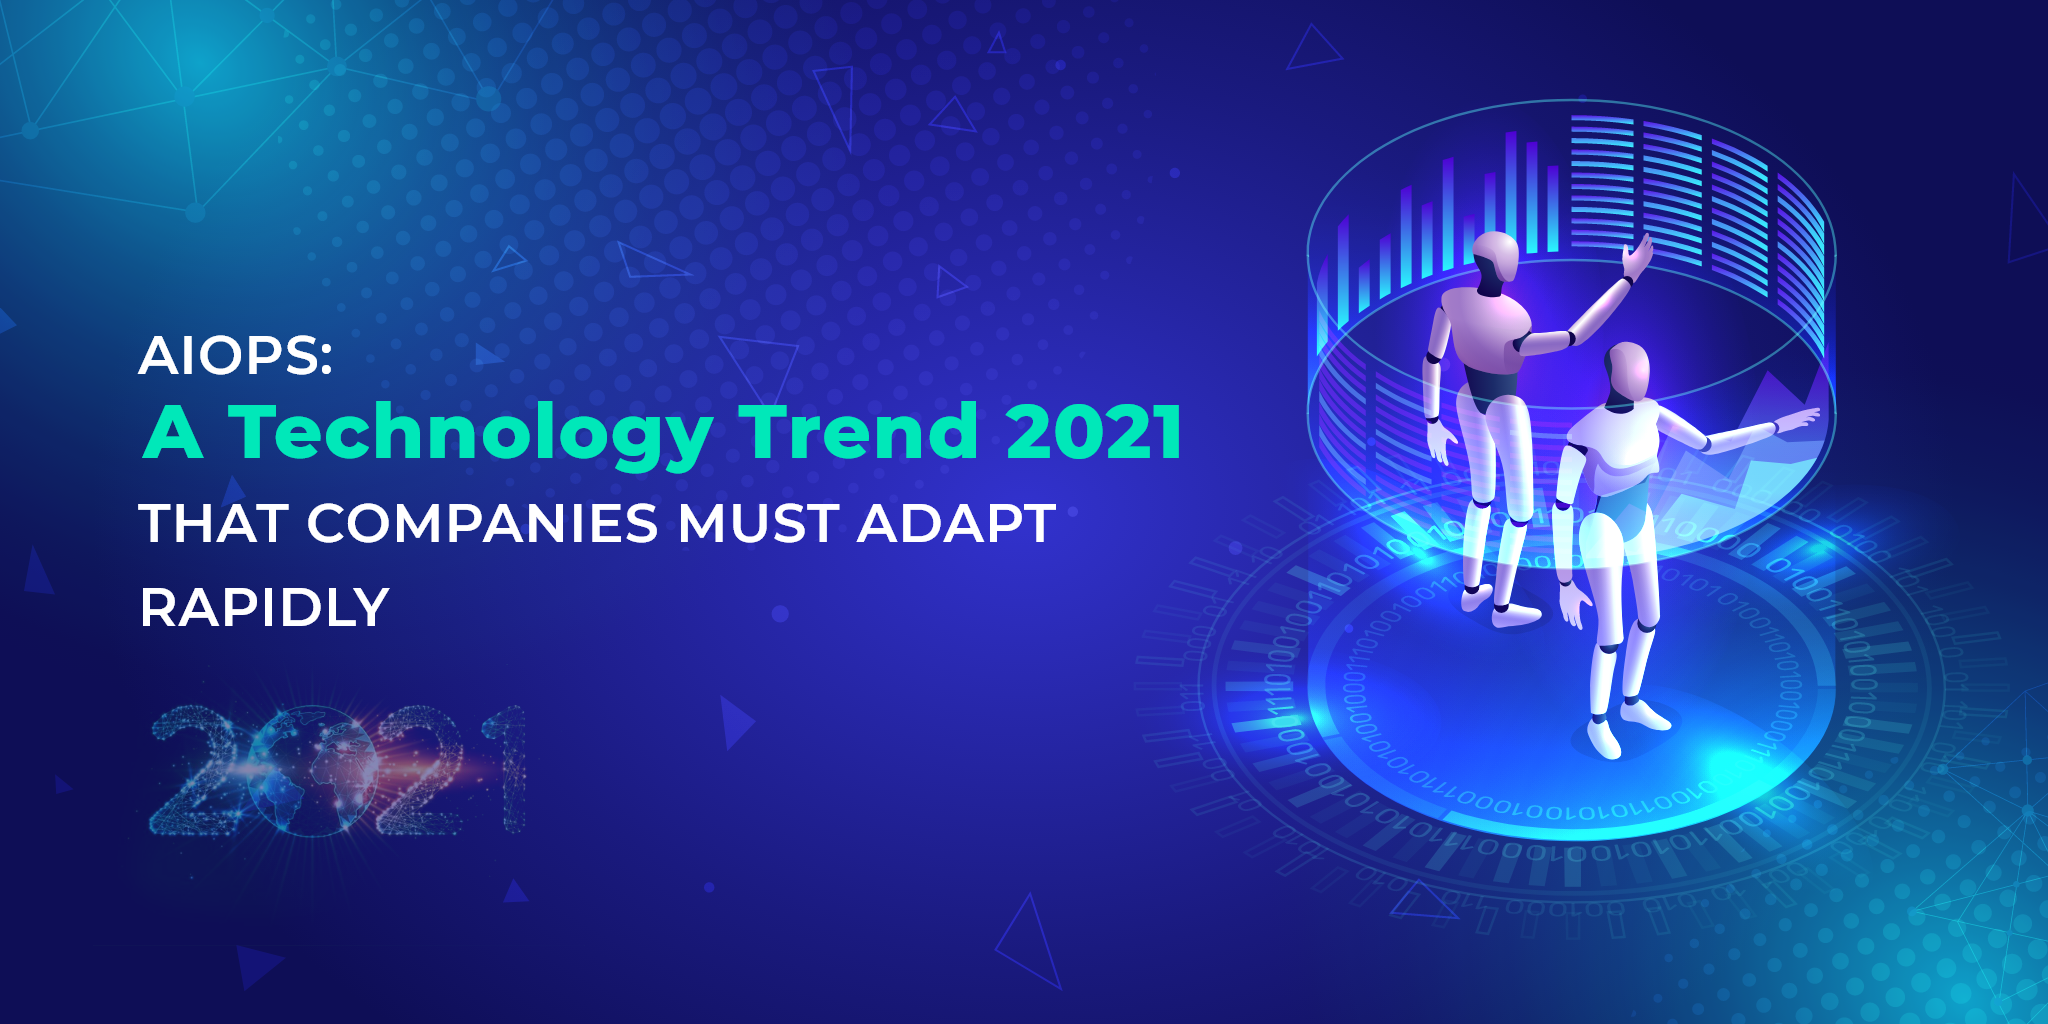 AIOps: A Technology Trend 2021 that Companies Must Adapt Rapidly